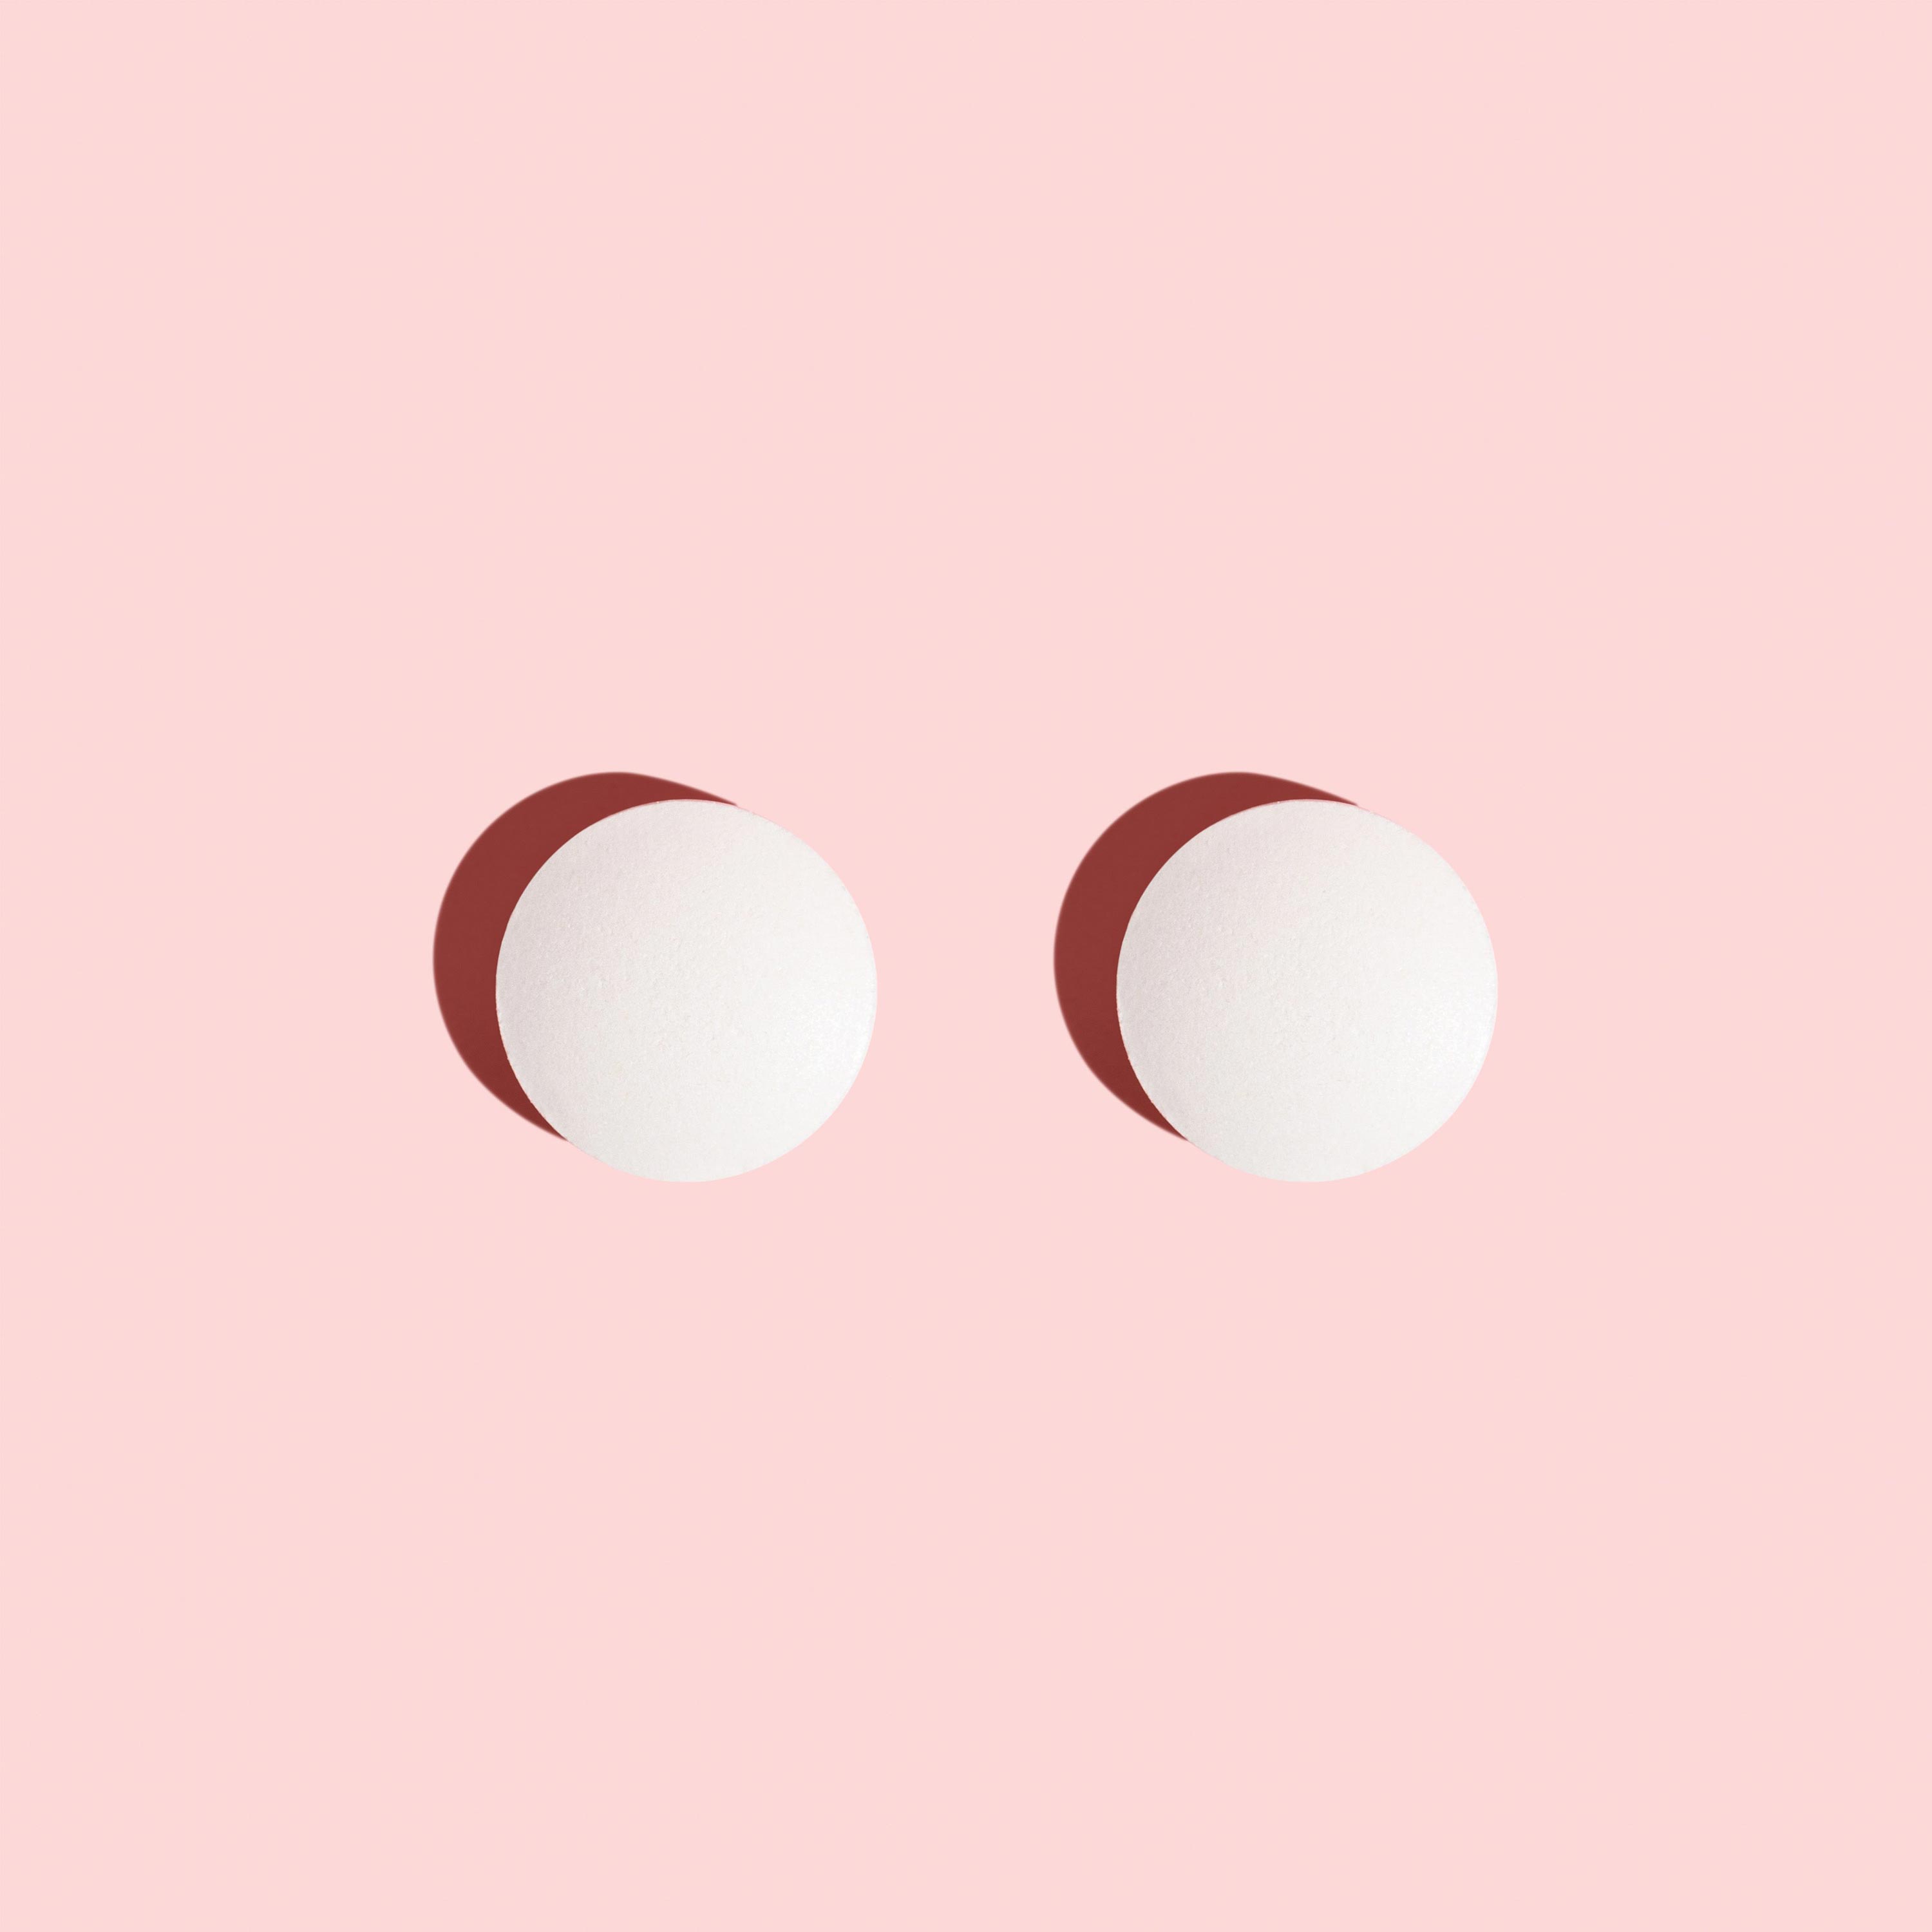 Two probiotic pills for women's health on a pink background